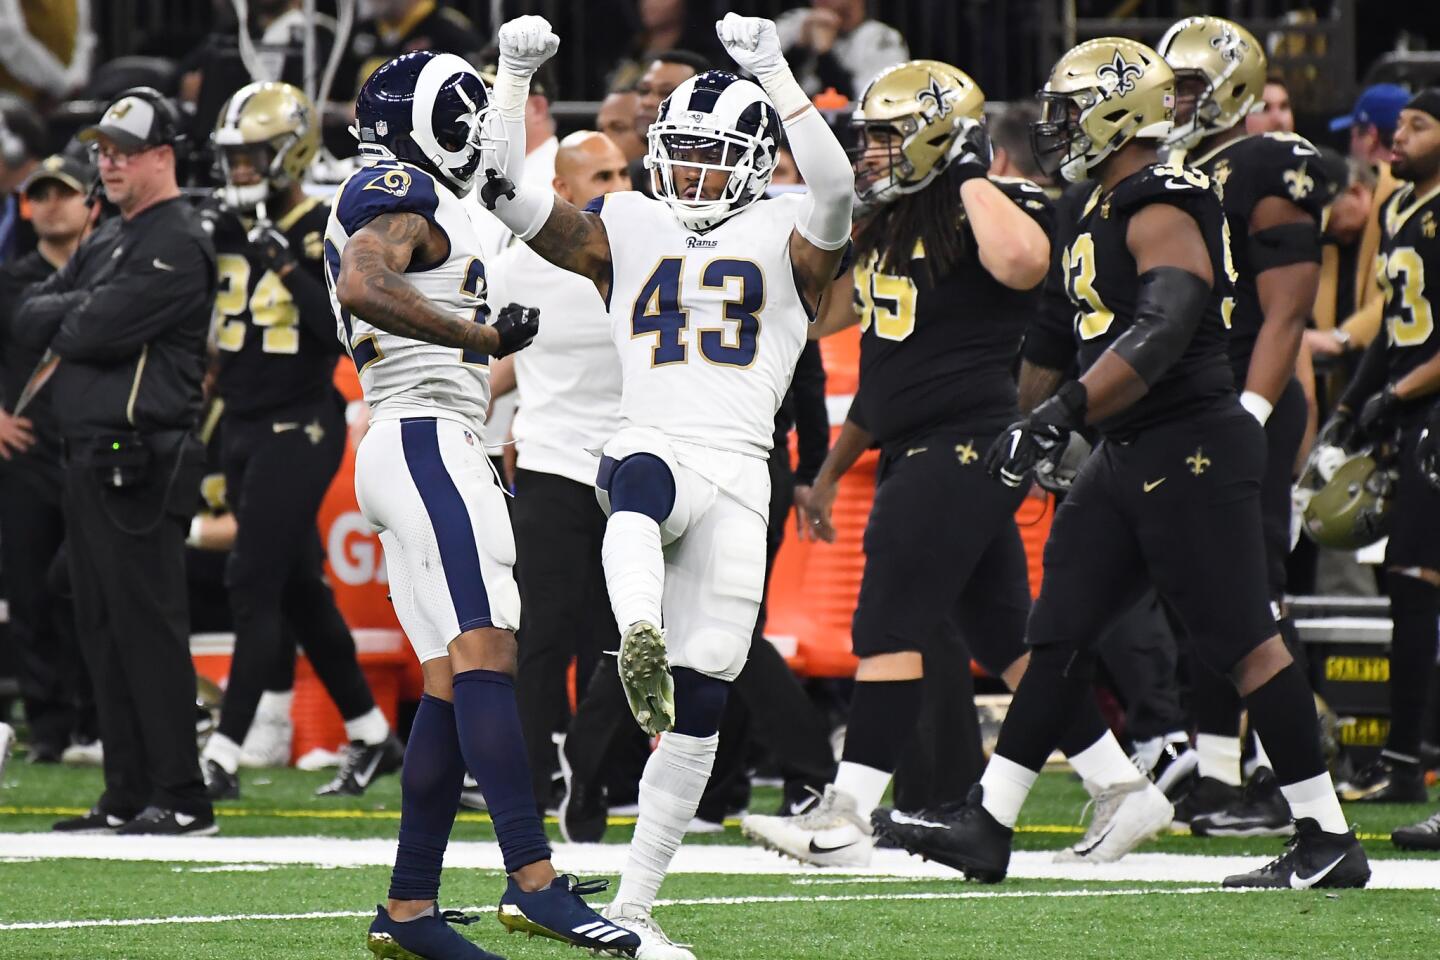 Rams safety John Johnson (43) celebrates his interception against the New Orleans Saints in overtime in the NFC Championship at the Superdome in New Orleans Sunday.